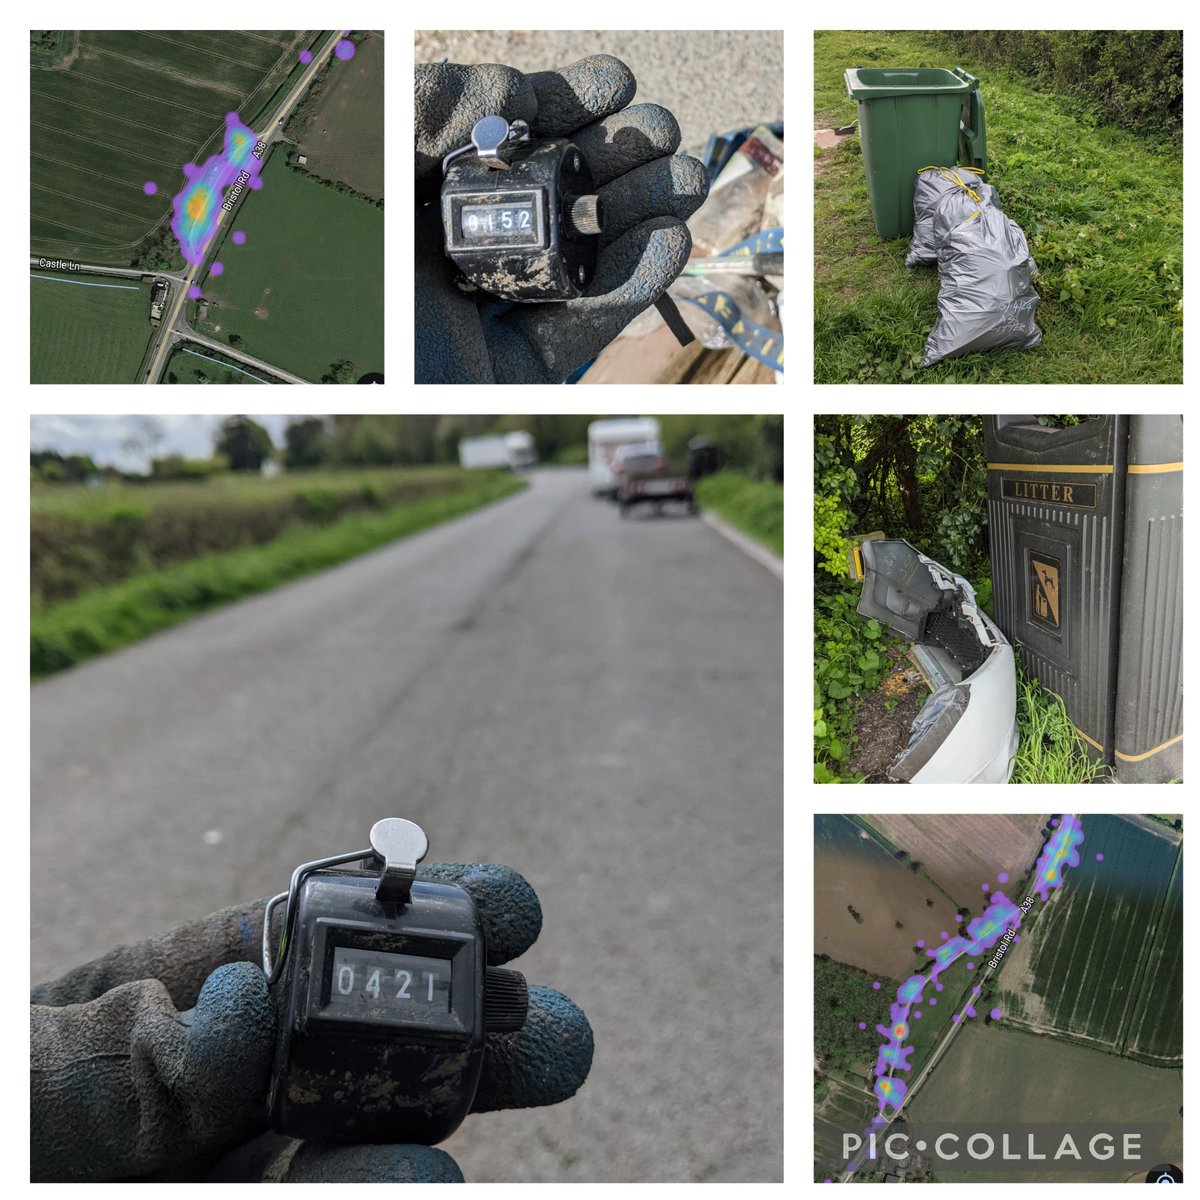 3 hrs & 2 #A38 lay-bys #Buttyman & #BurgerVan & 152 & 421 #litter items. Didn't tackle any more due the #aroma of #farmers #muckspreading in the area. This has been absorbed into my skin & clothes to give her another smell to complain about 🤢 Supporting @StroudDC @TruckersUp.